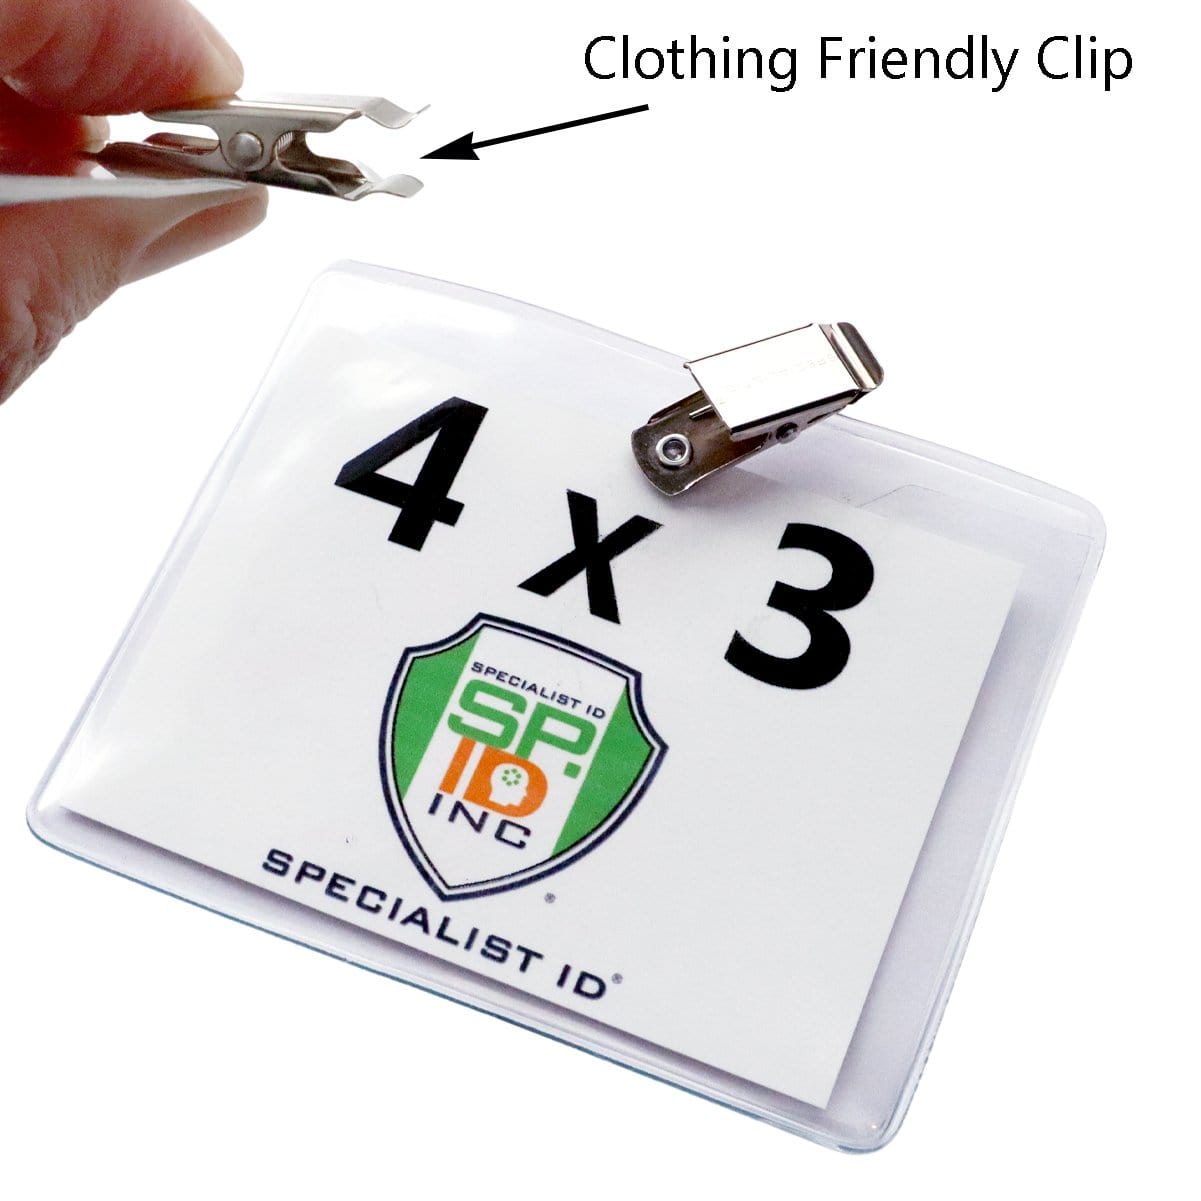 Heavy Vaccination Card Holder with Clip - 4 x 3 Vinyl Badge Holder with Clothing Friendly Bulldog Clip - Clear, Horizontal & Durable (SPID-1440) SPID-1440